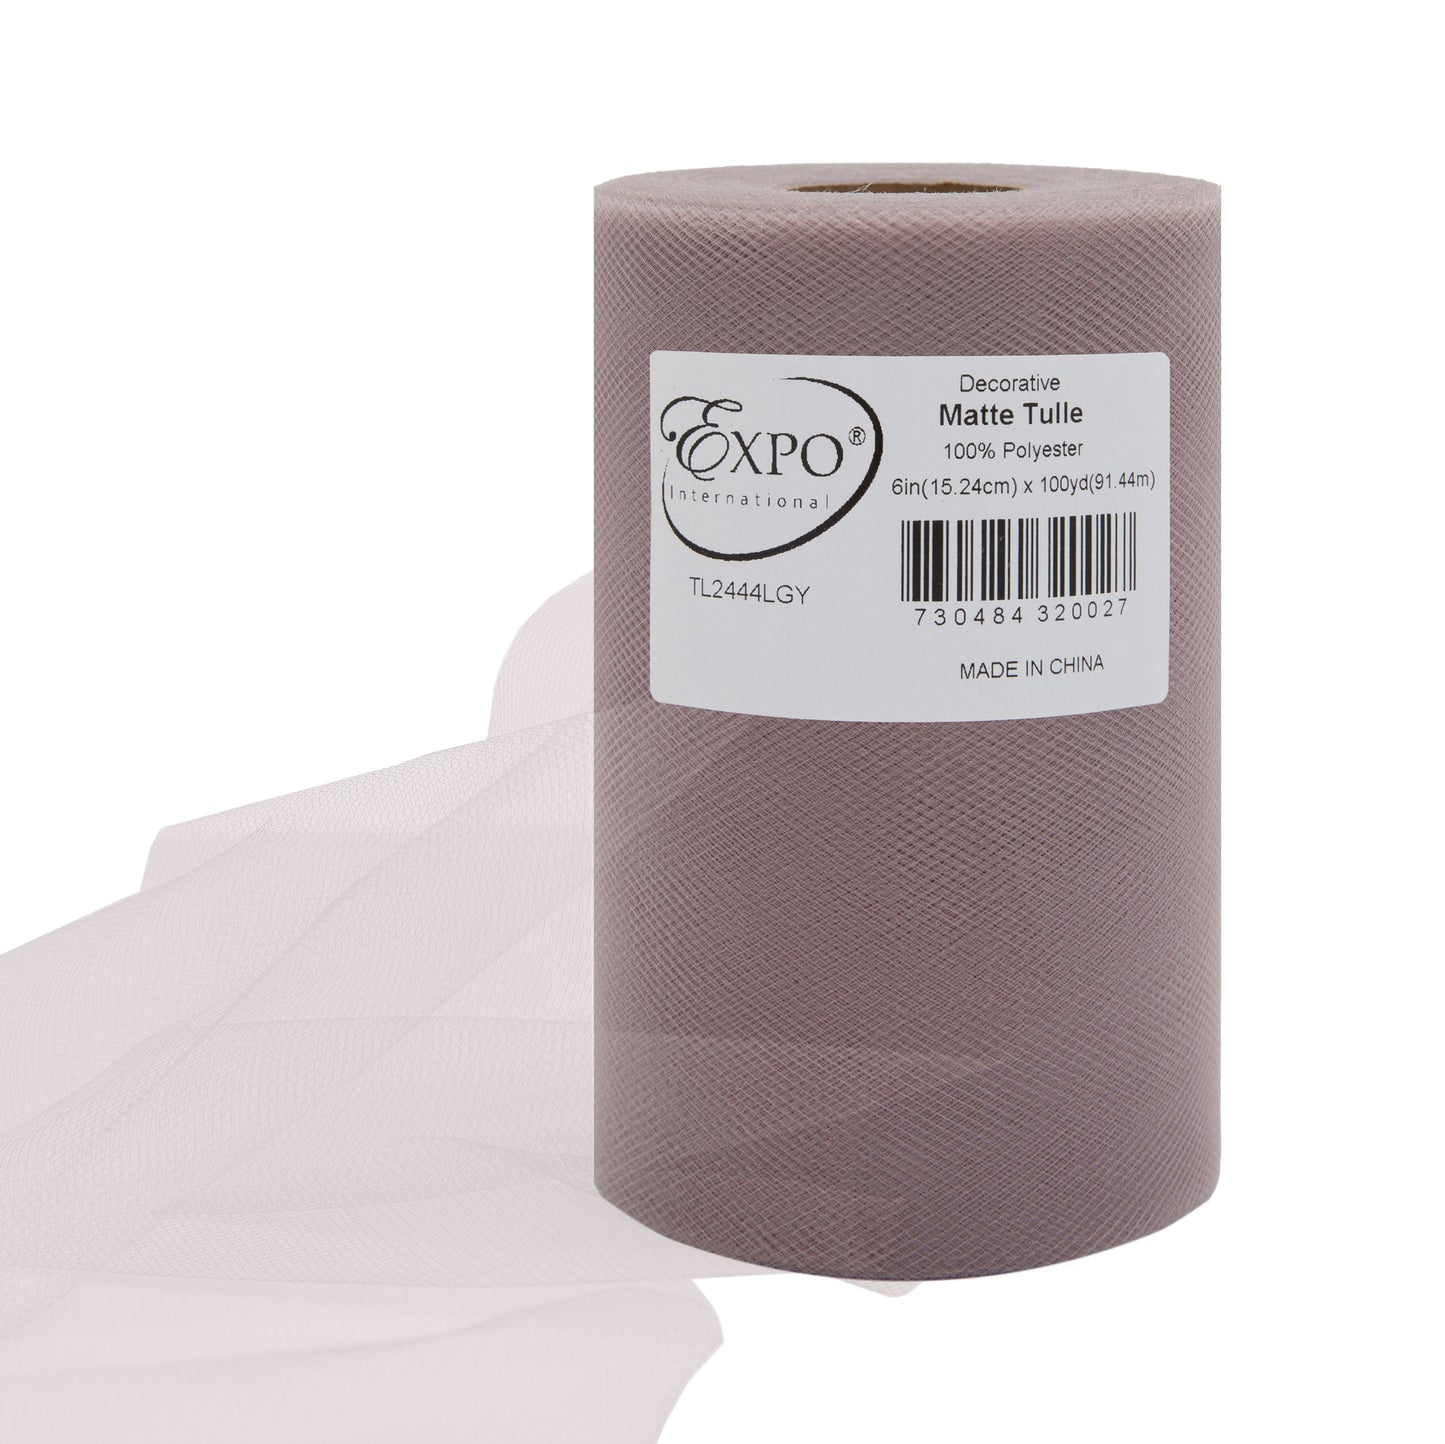 Decorative Matte Tulle, Roll/Spool of 6” X 100 Yards, Pack of 1